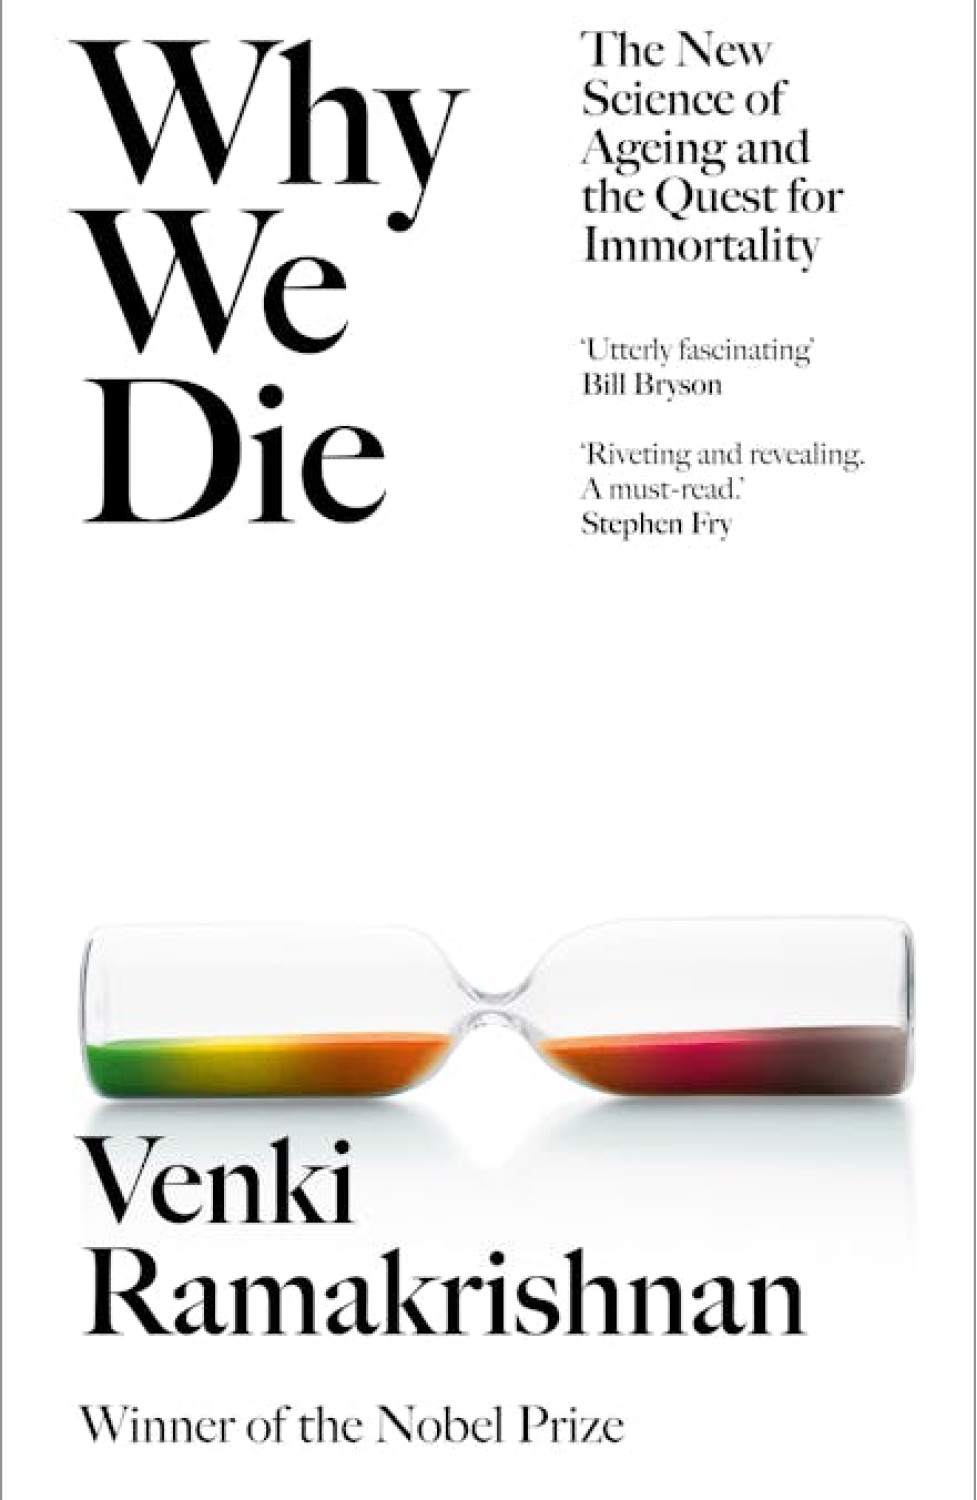 WHY WE DIE : THE NEW SCIENCE OF AGEING AND THE QUEST FOR IMMORTALITY